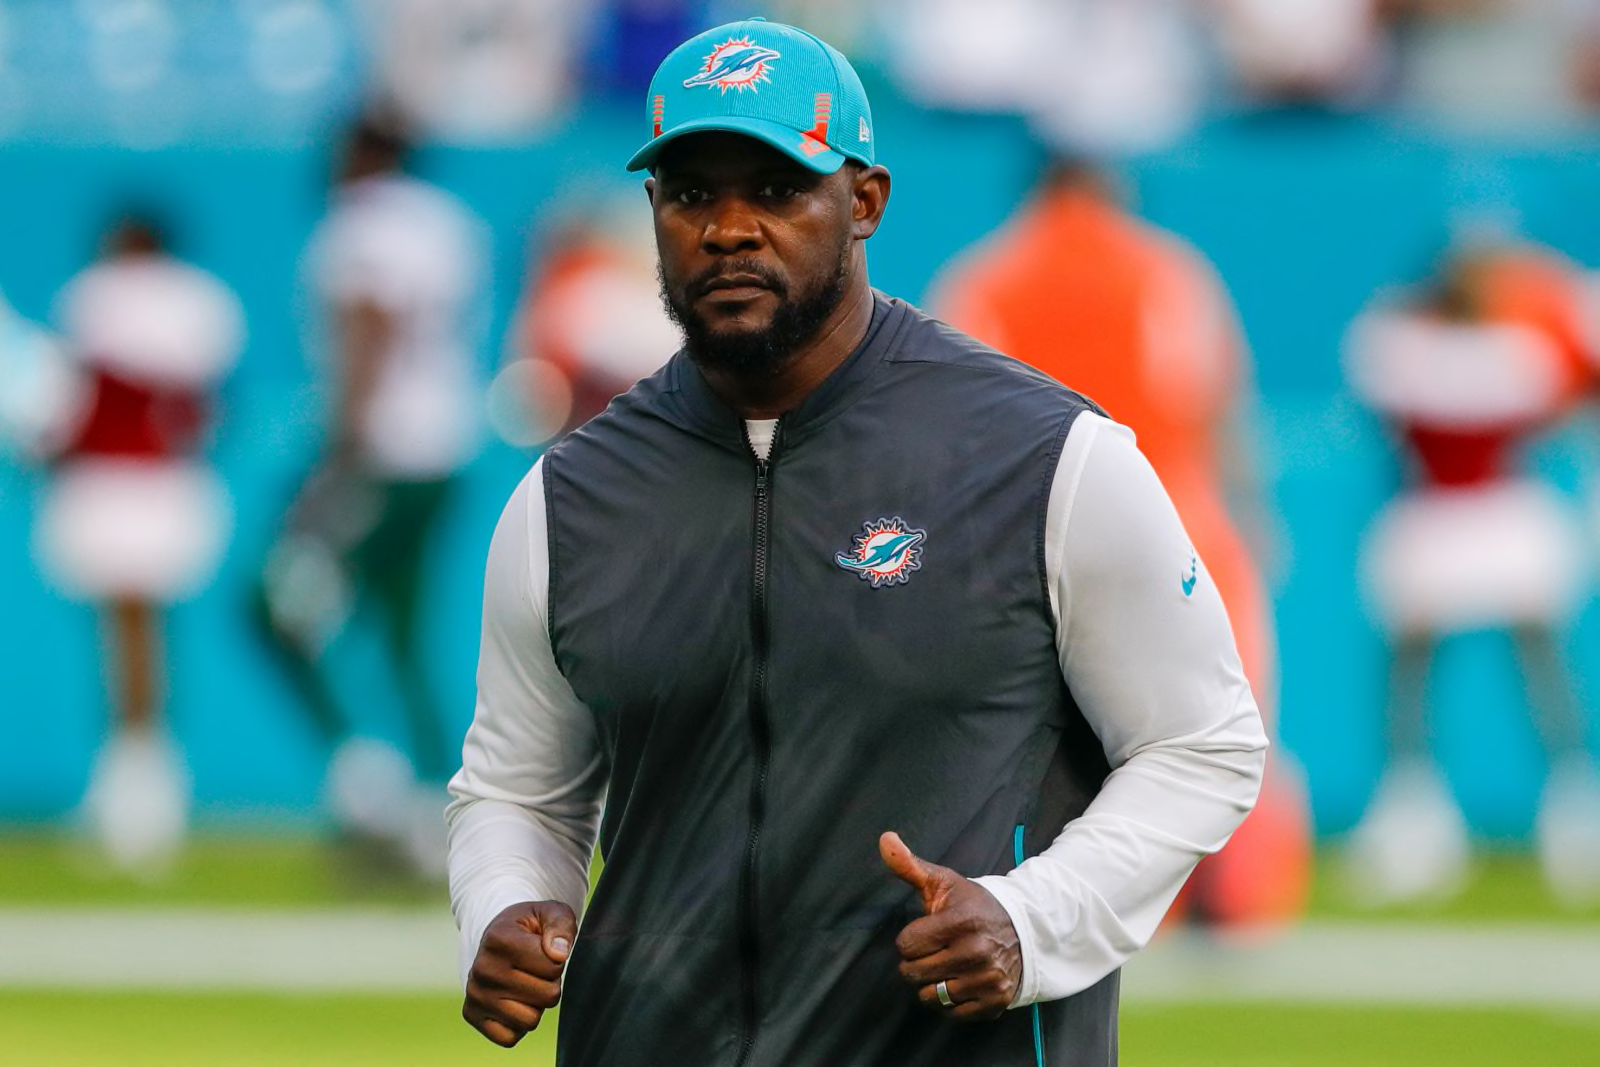 Top 3 landing spots for Brian Flores after being fired by Dolphins